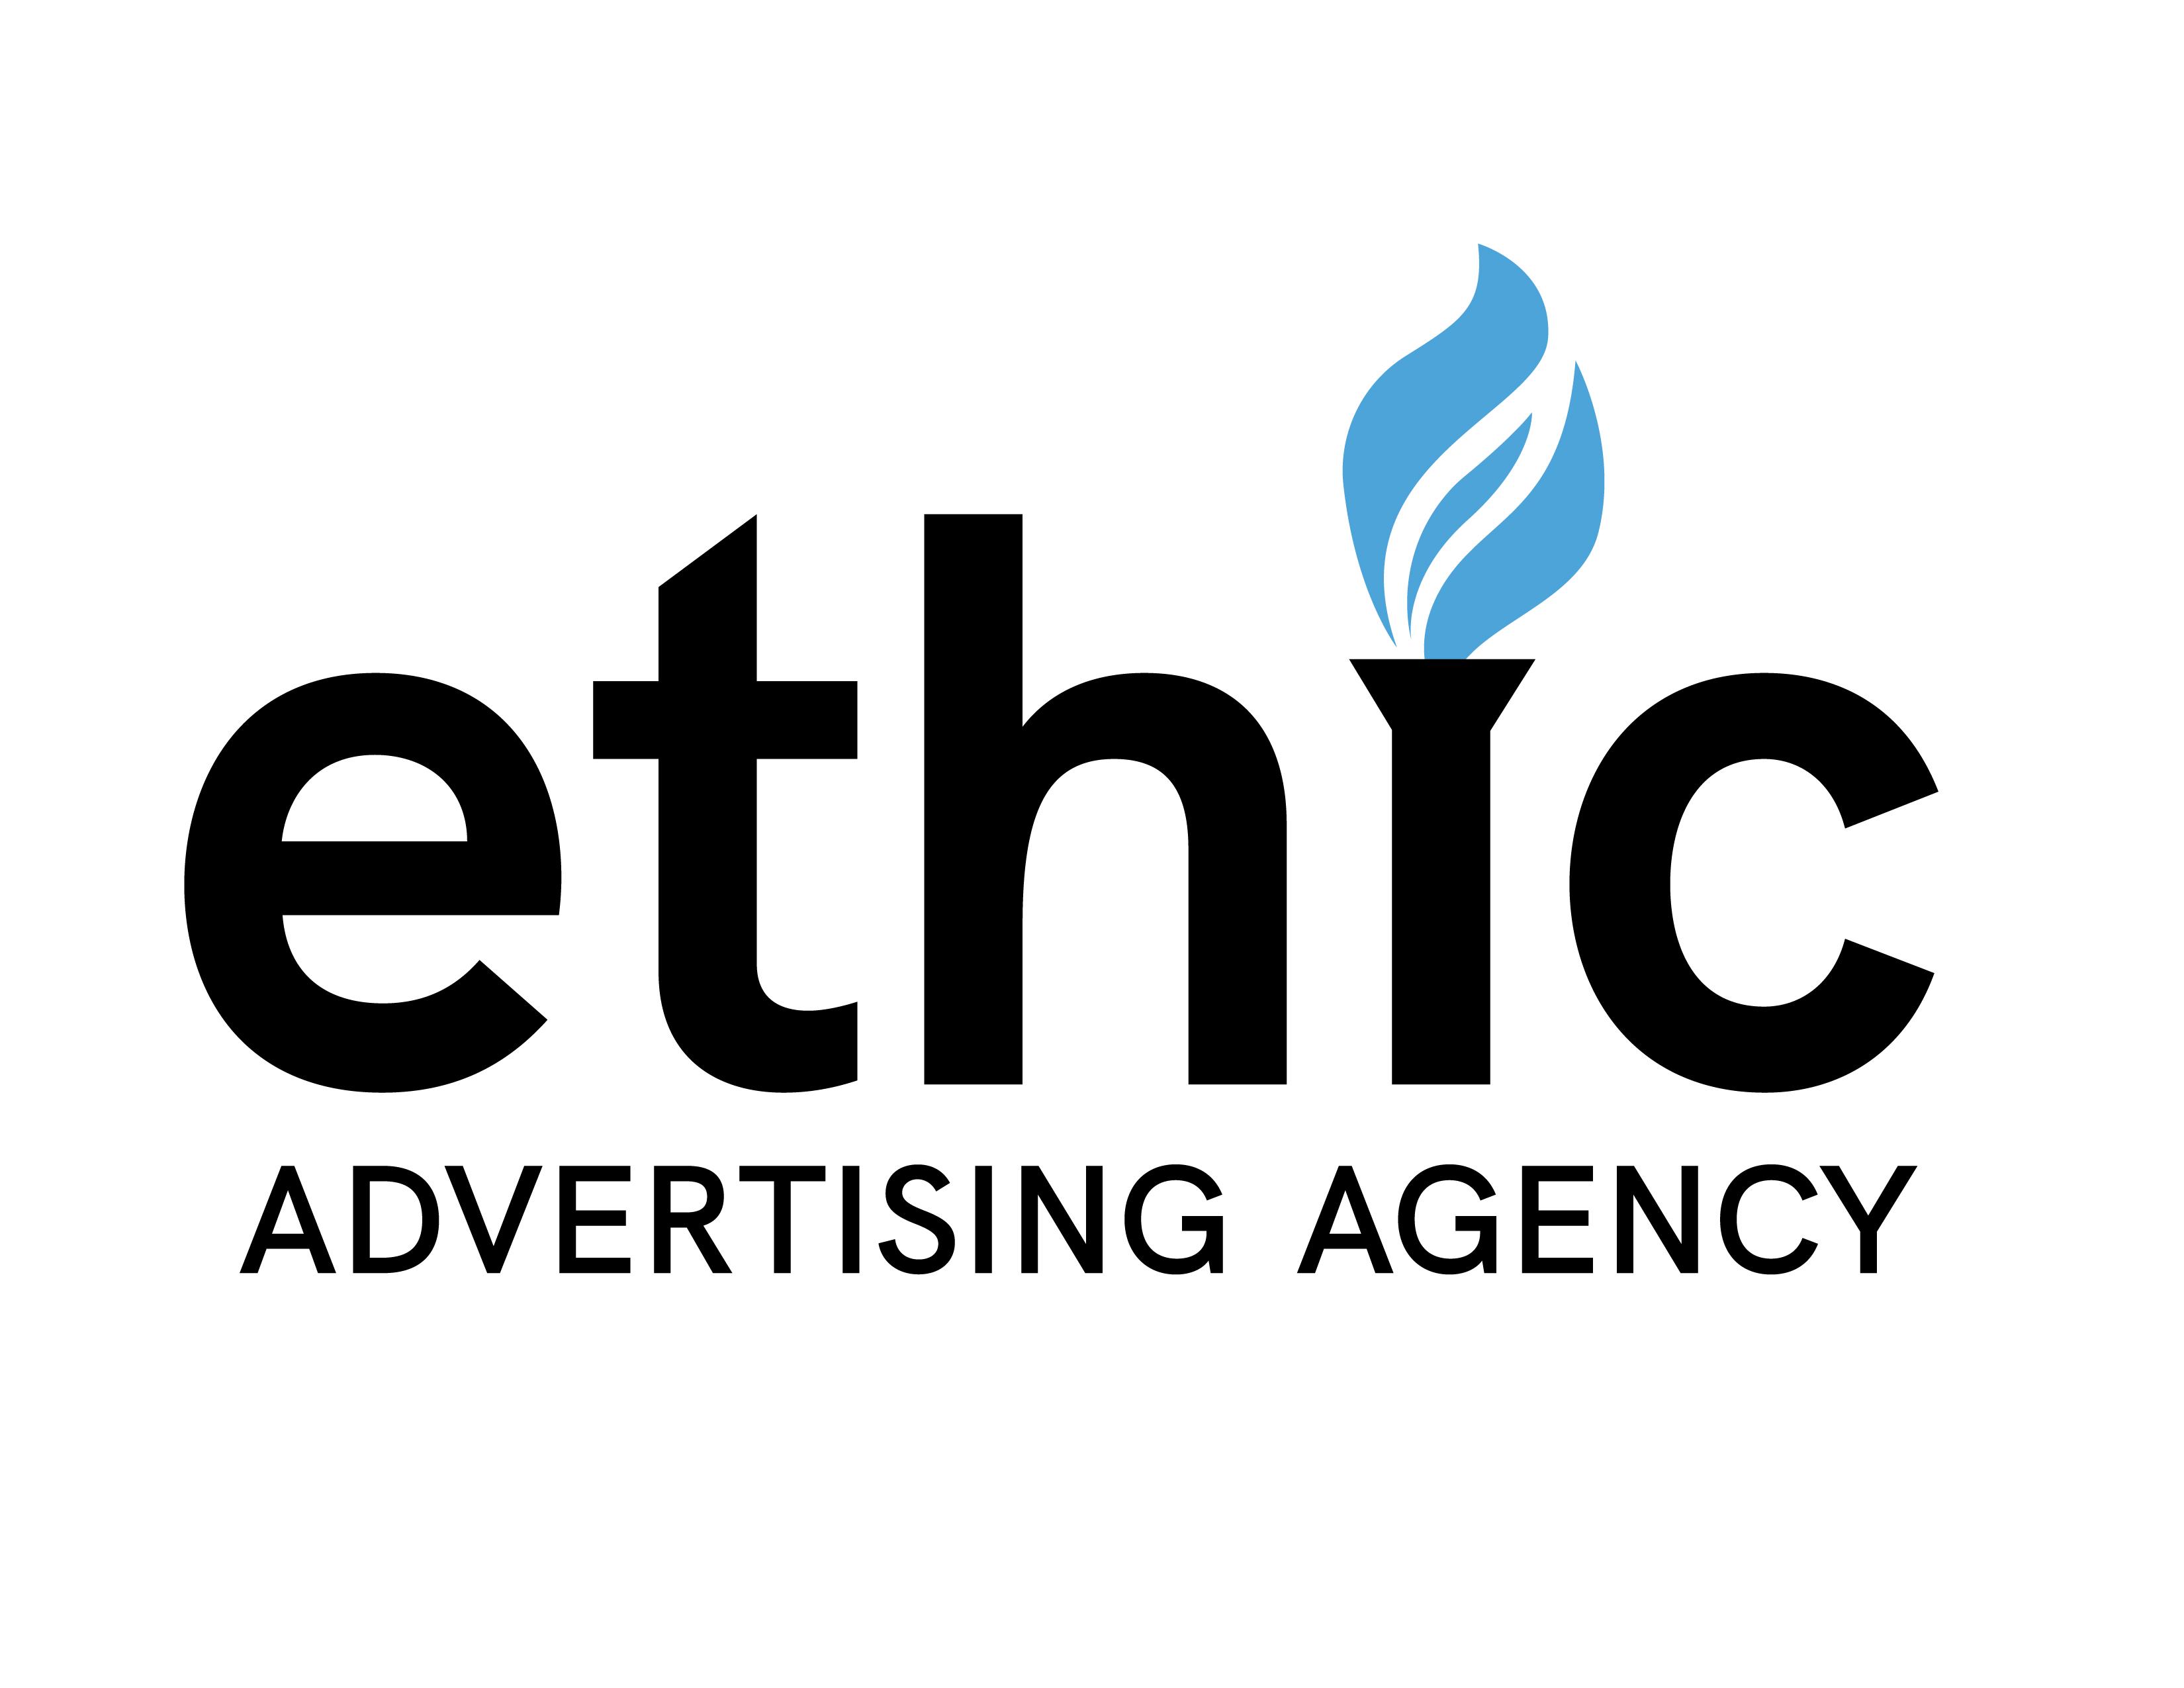 Ethic Advertising Agency profile on Qualified.One